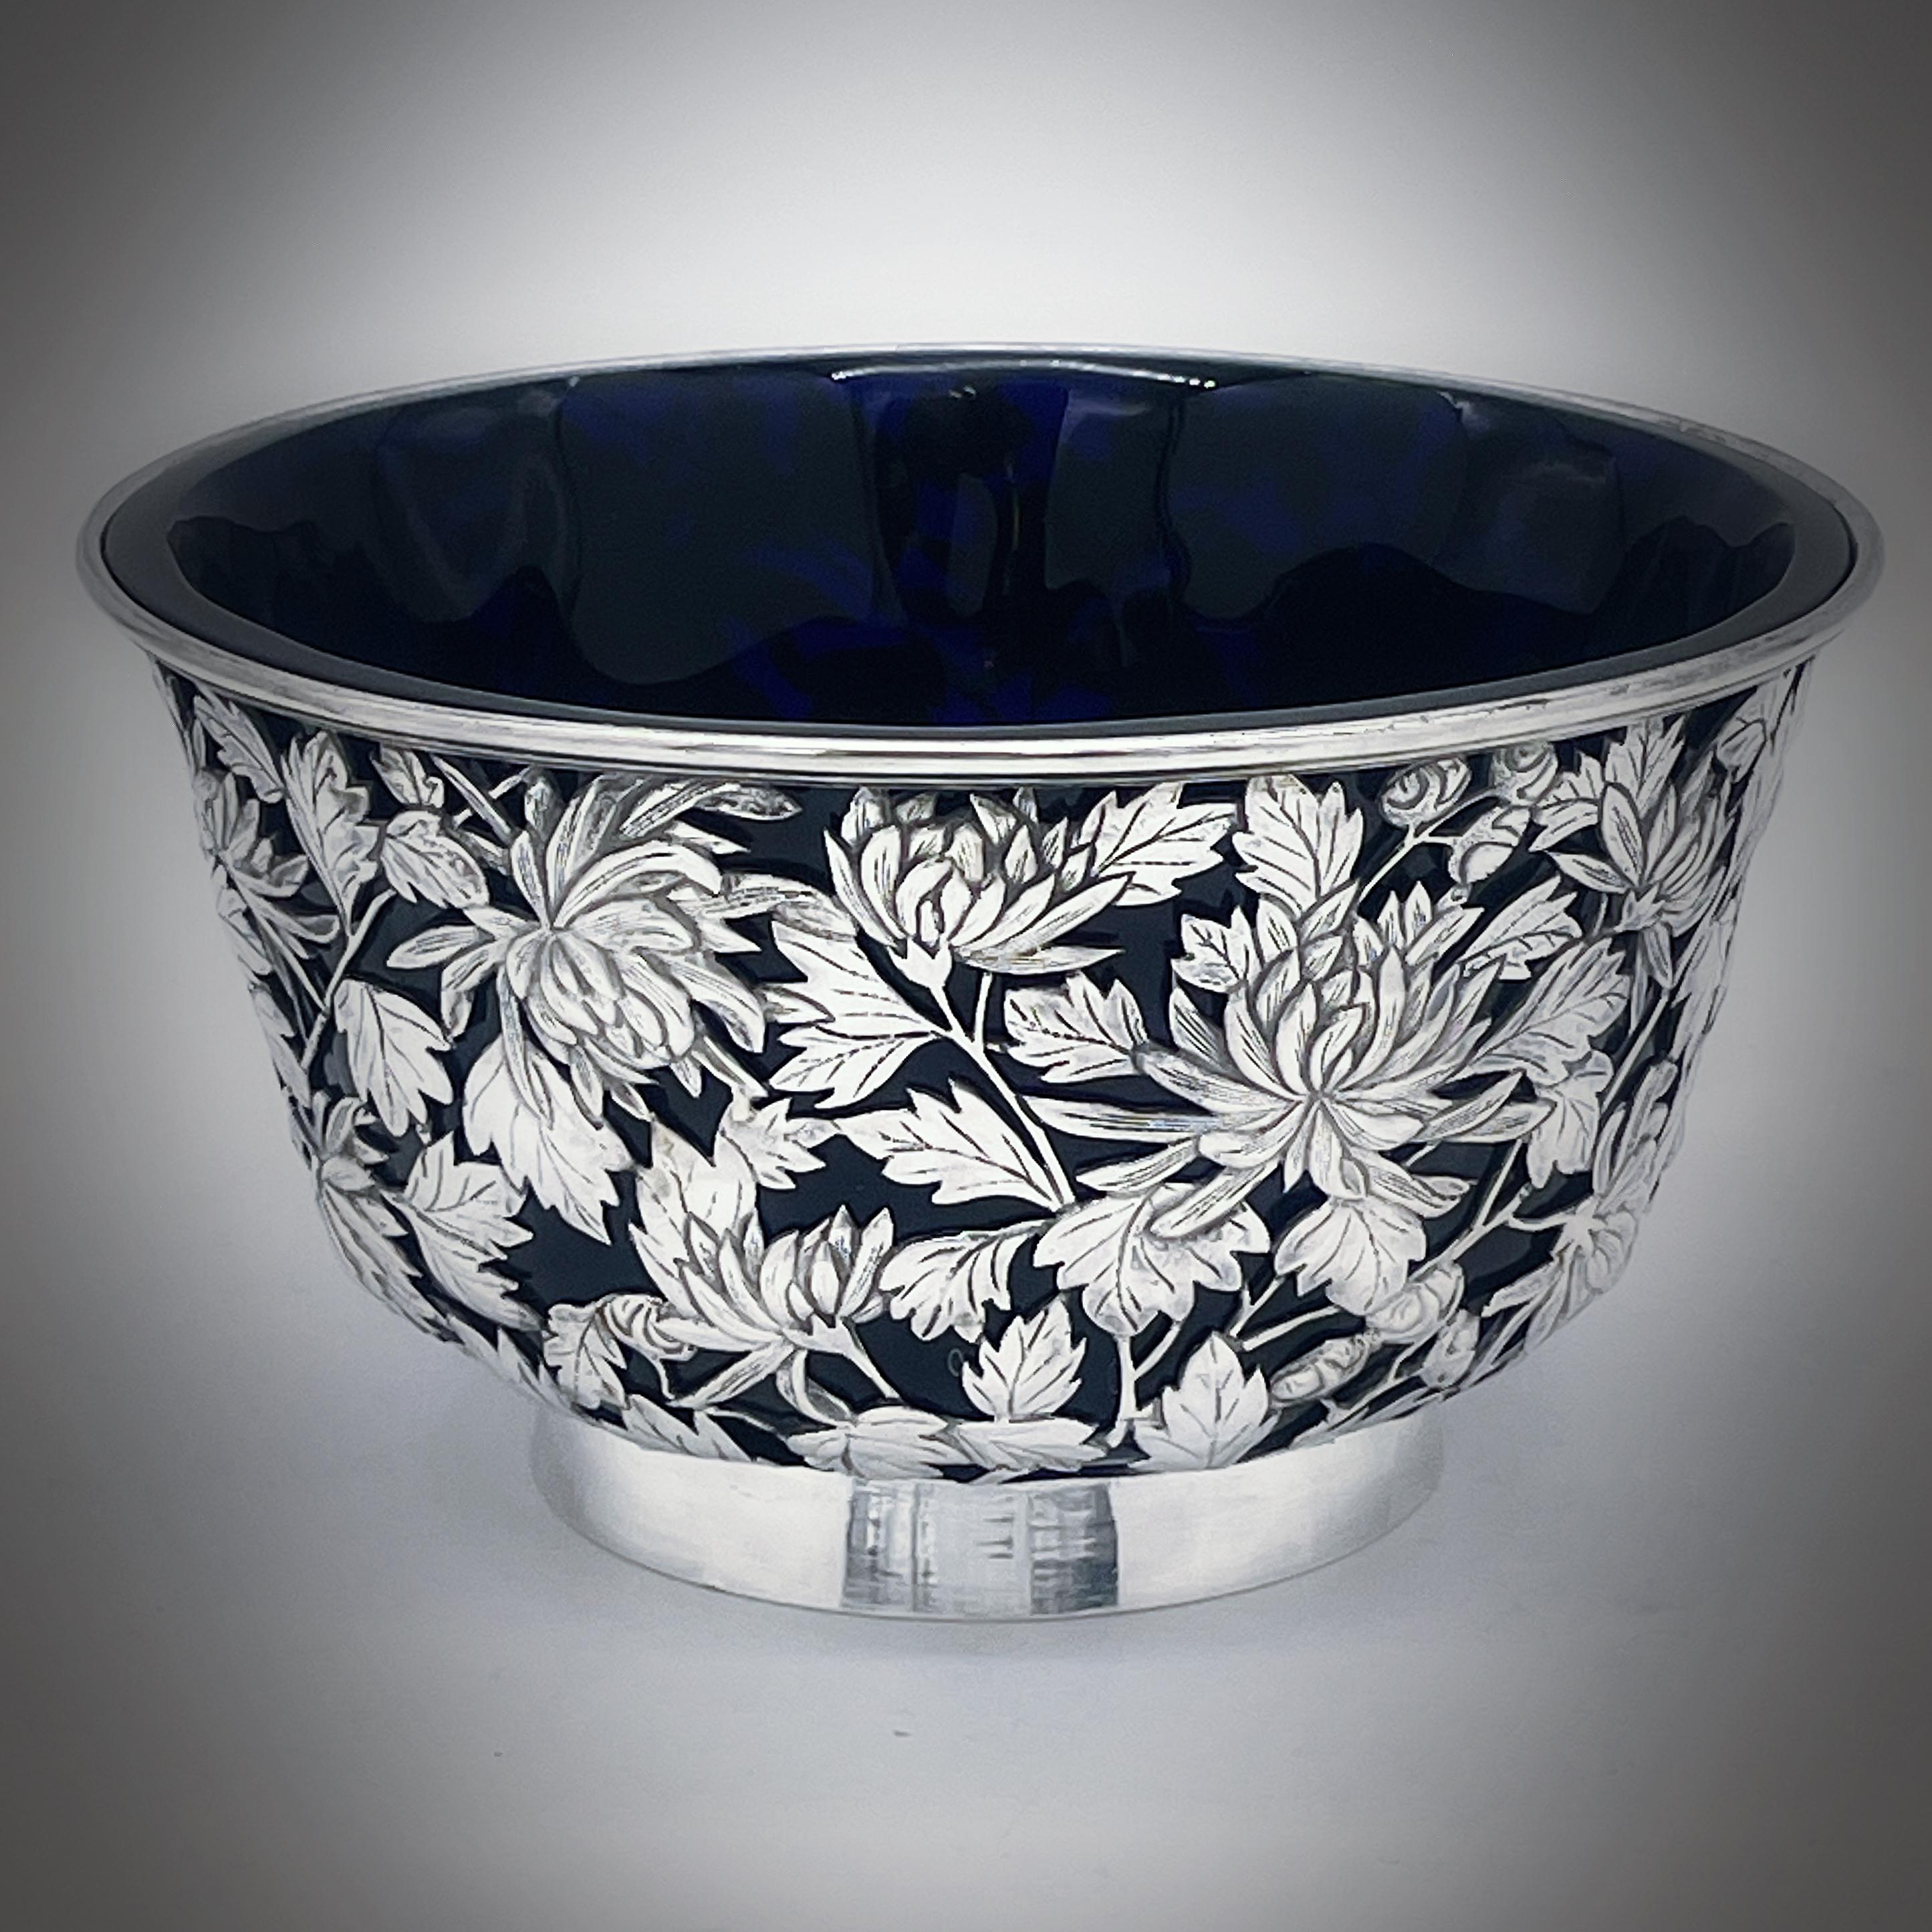 A Chinese export silver bowl circa 1890, with later blue glass liner. The bowl is pierced and has wonderfully detailed chrysanthemum decoration and sits on a plain collet foot. The retailer's mark is KC for Kwong Ching, '广珍', and there is a a